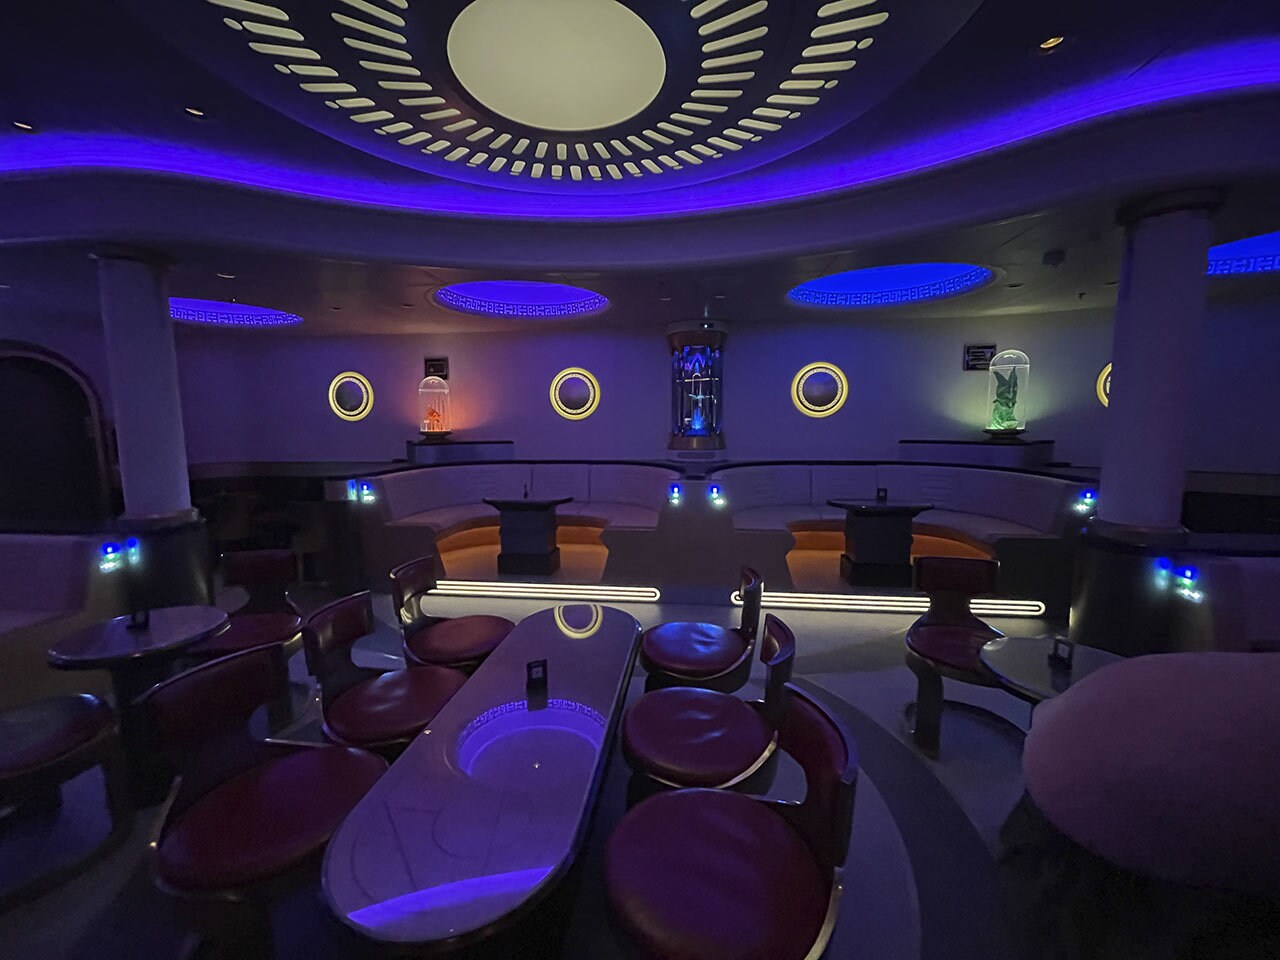 Star Wars Hyperspace lounge's seating area